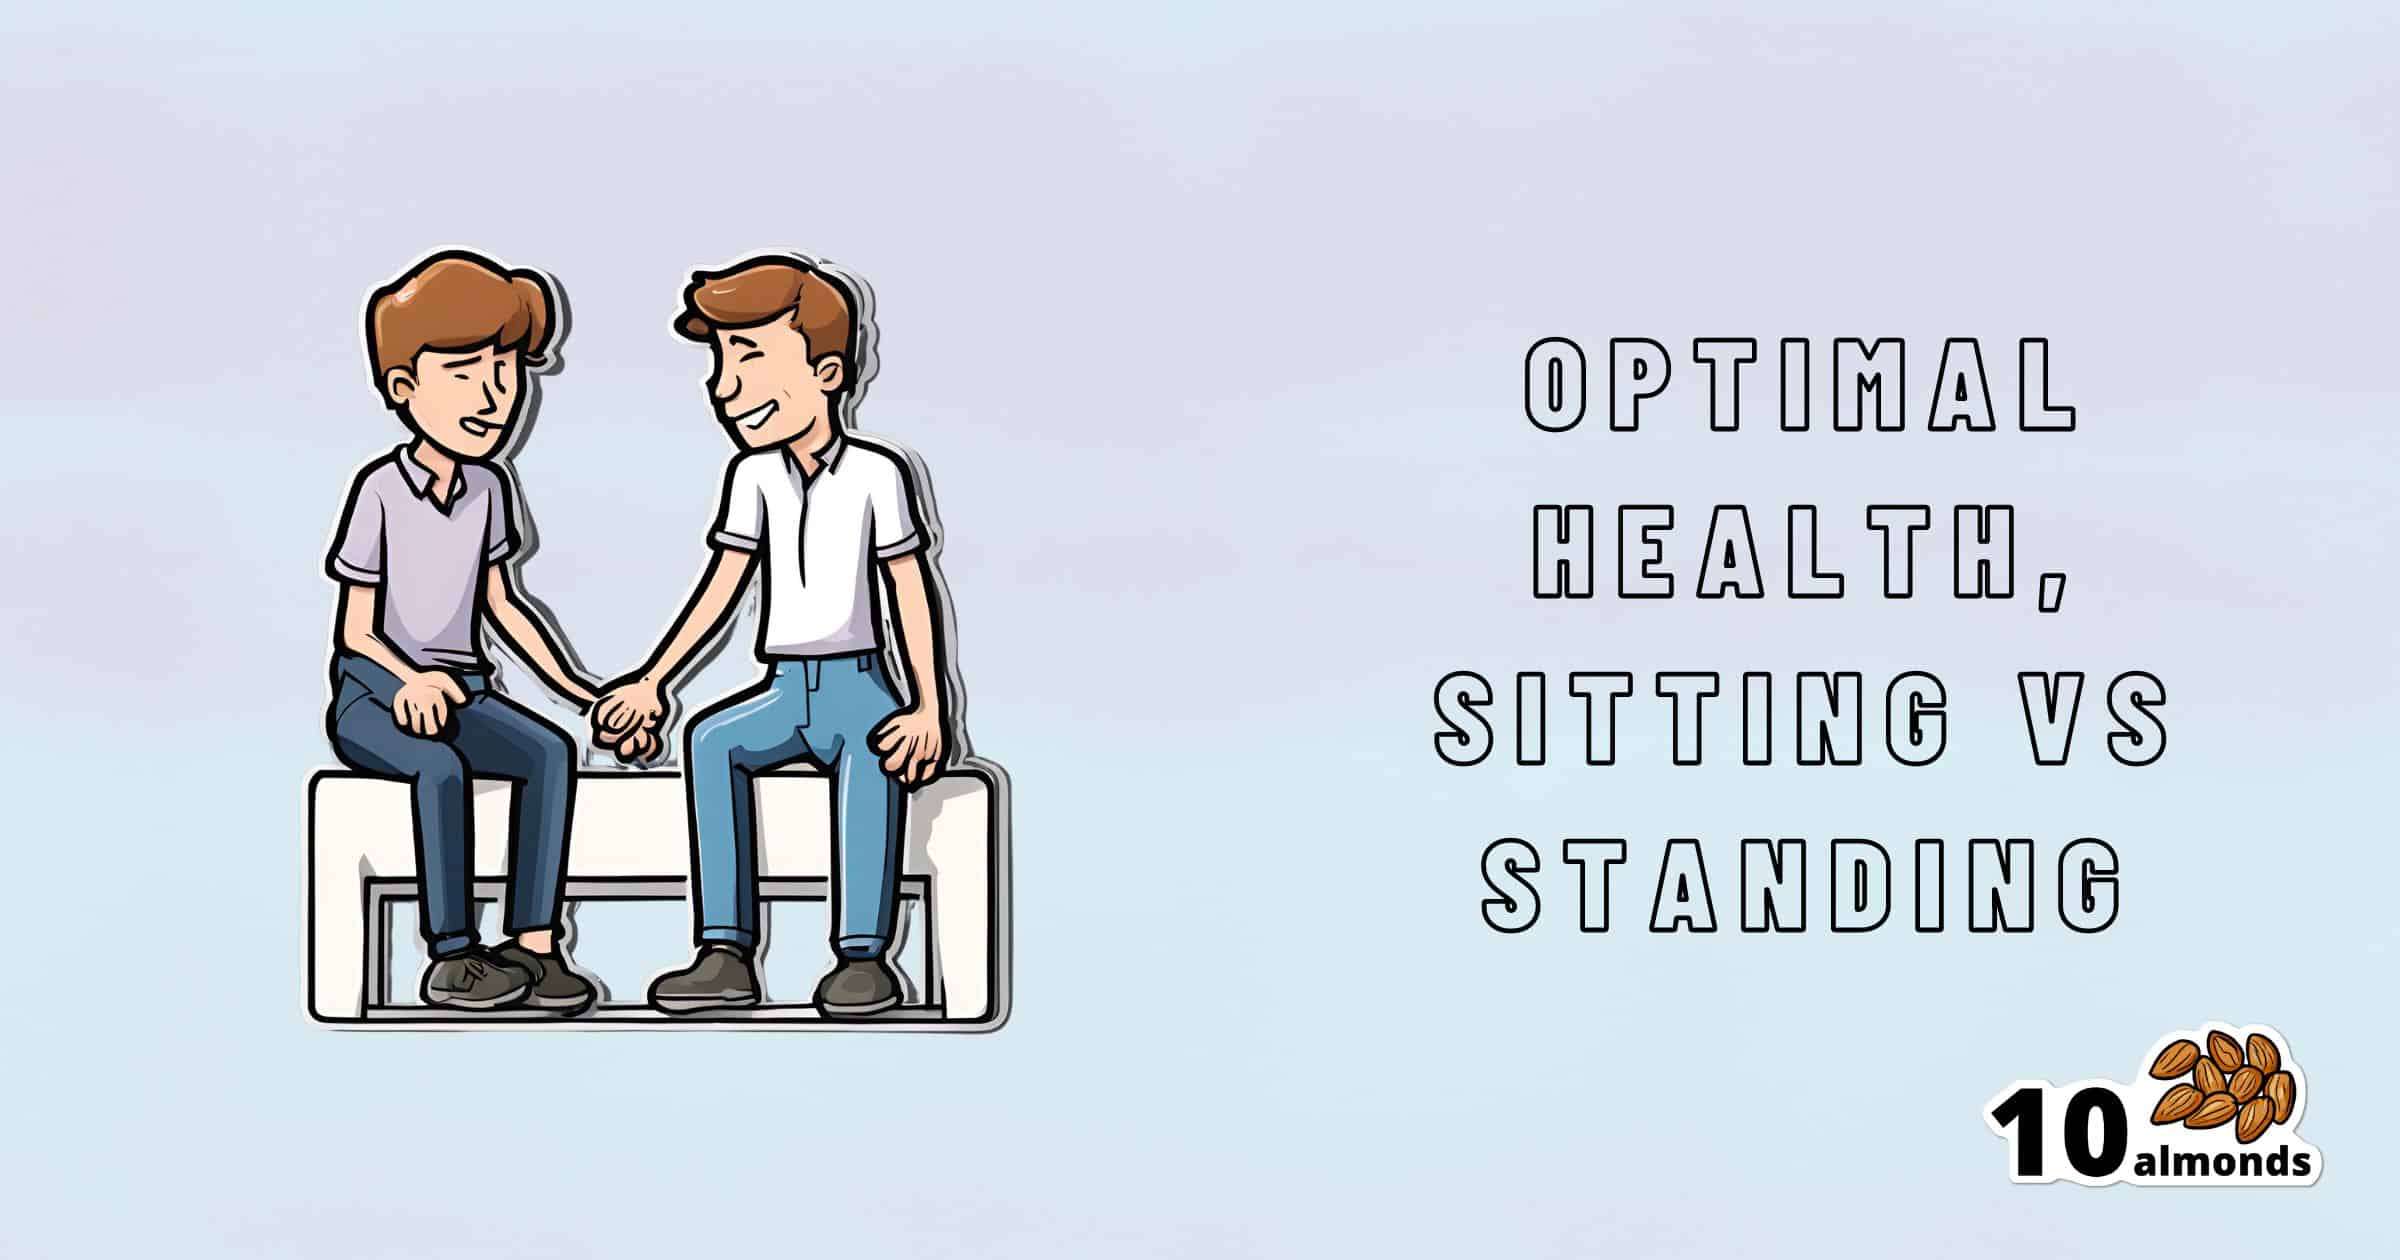 An illustration of two people sitting on a bench holding hands, with the text "Optimal Health: Sitting vs Standing" next to them. In the bottom right corner, there is an image of 10 almonds with the text "10 almonds" written above it.